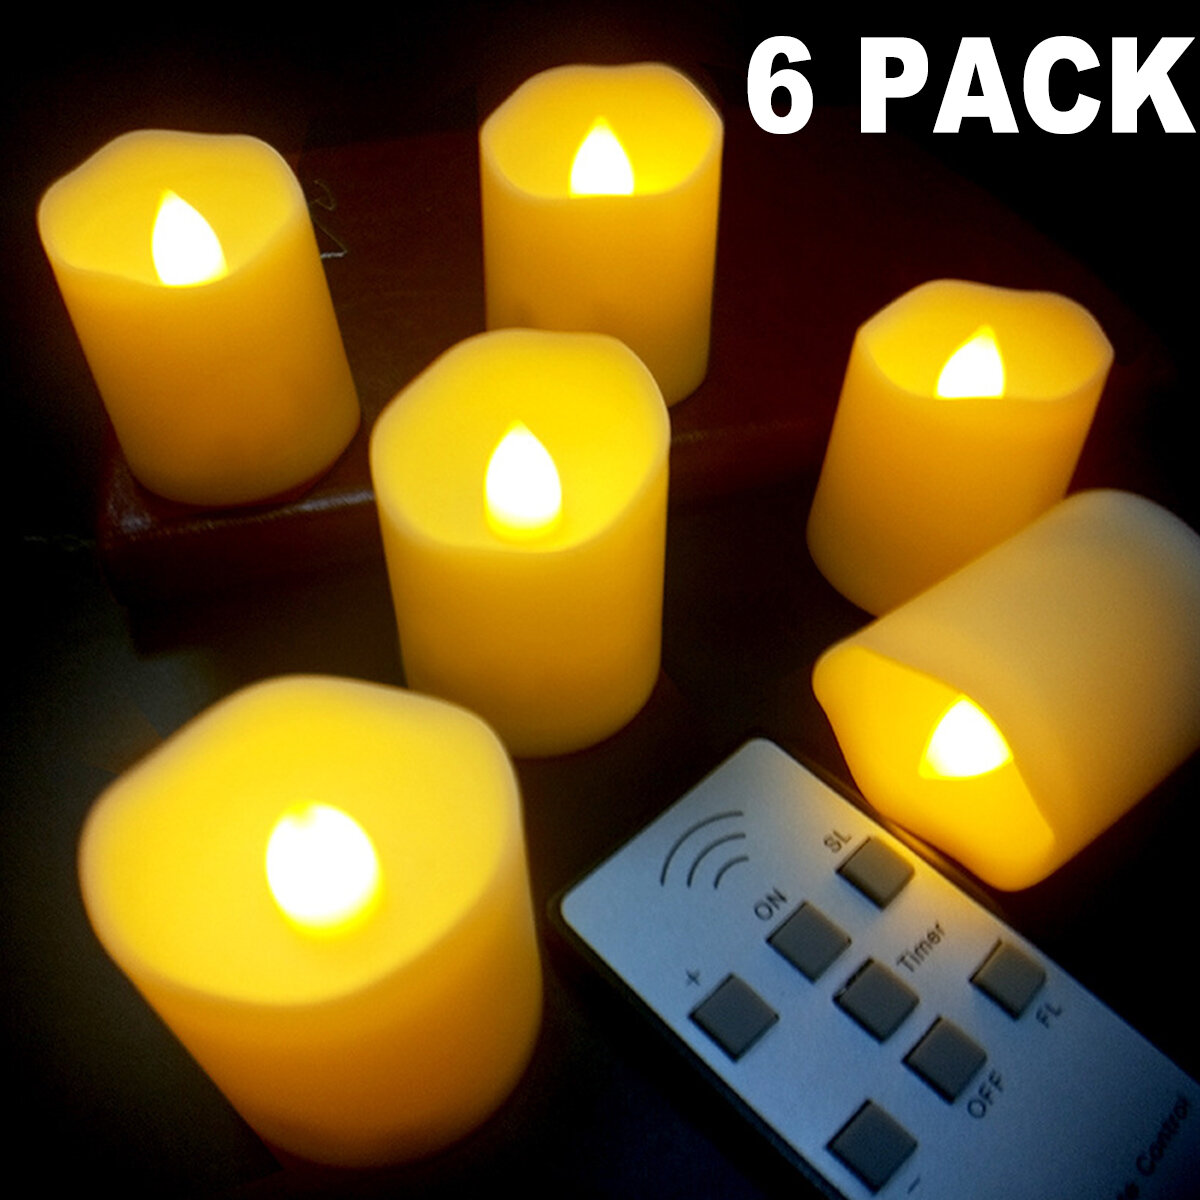 

6Pcs LED Flameless Candle Lights Warm Light Pillar Ivory Candles Moving Wick Battery Operated Timer Remote Control Night